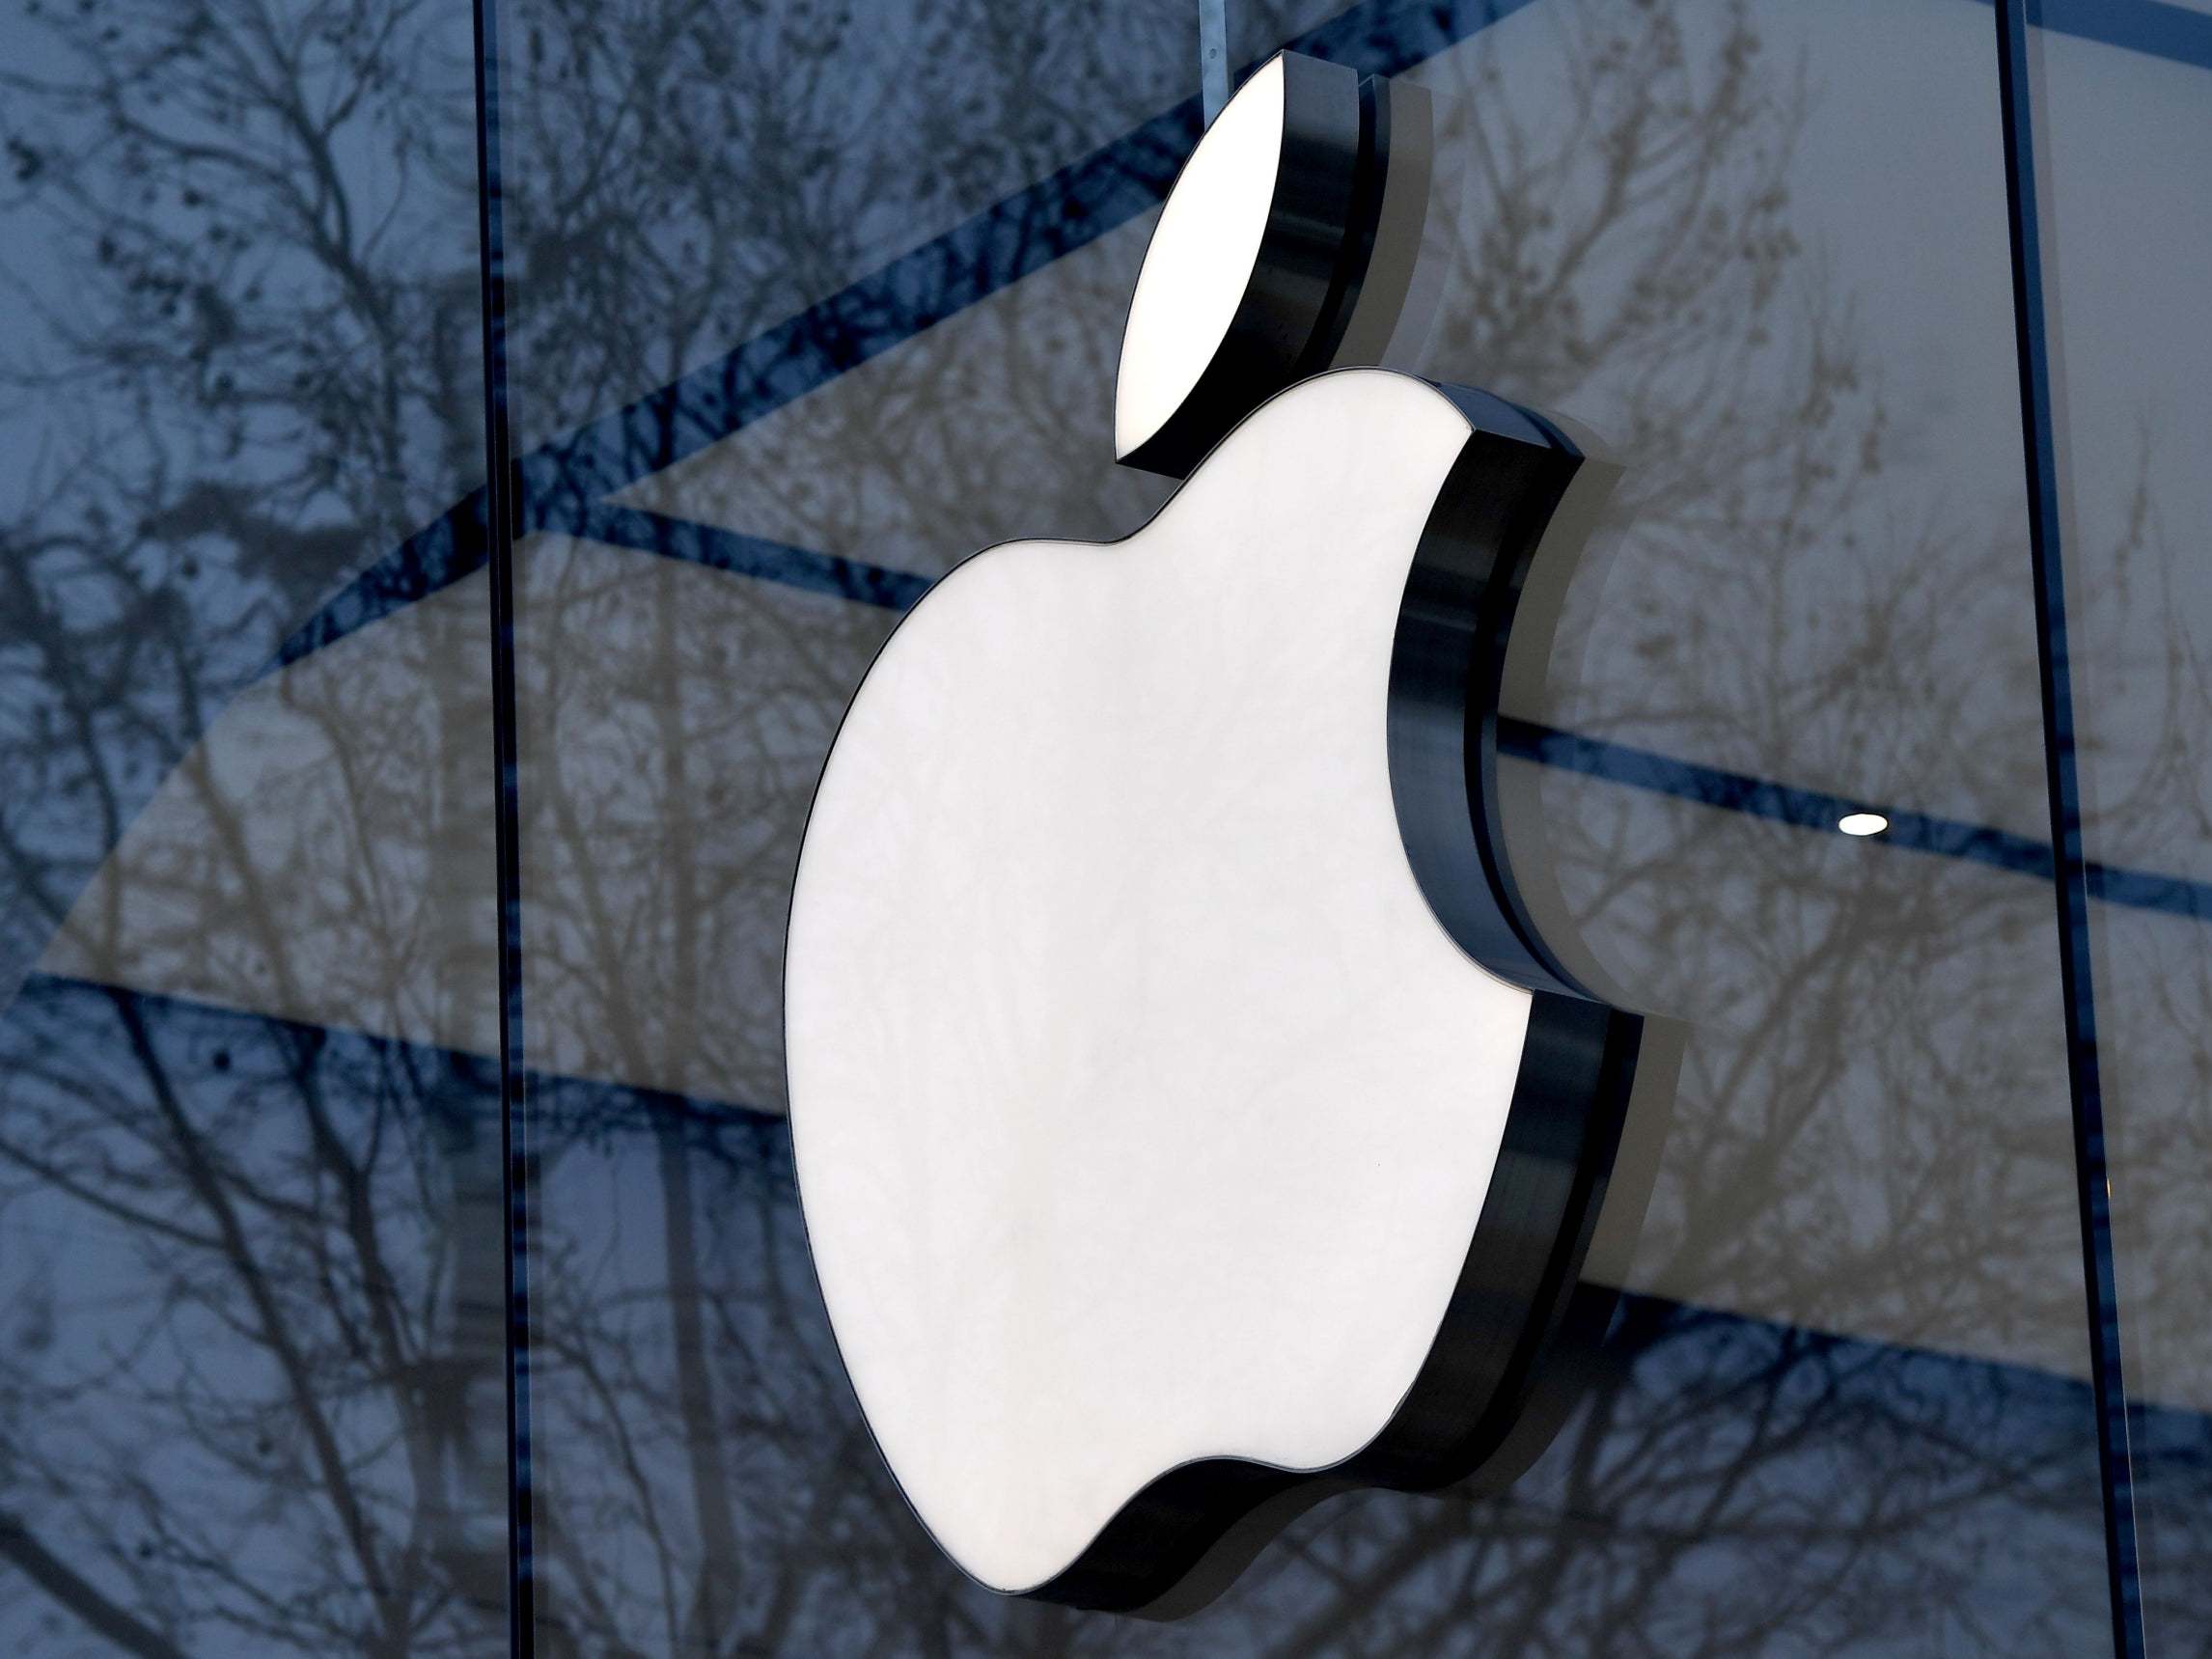 Apple had been accused of enjoying illegal state aid through tax breaks in Ireland